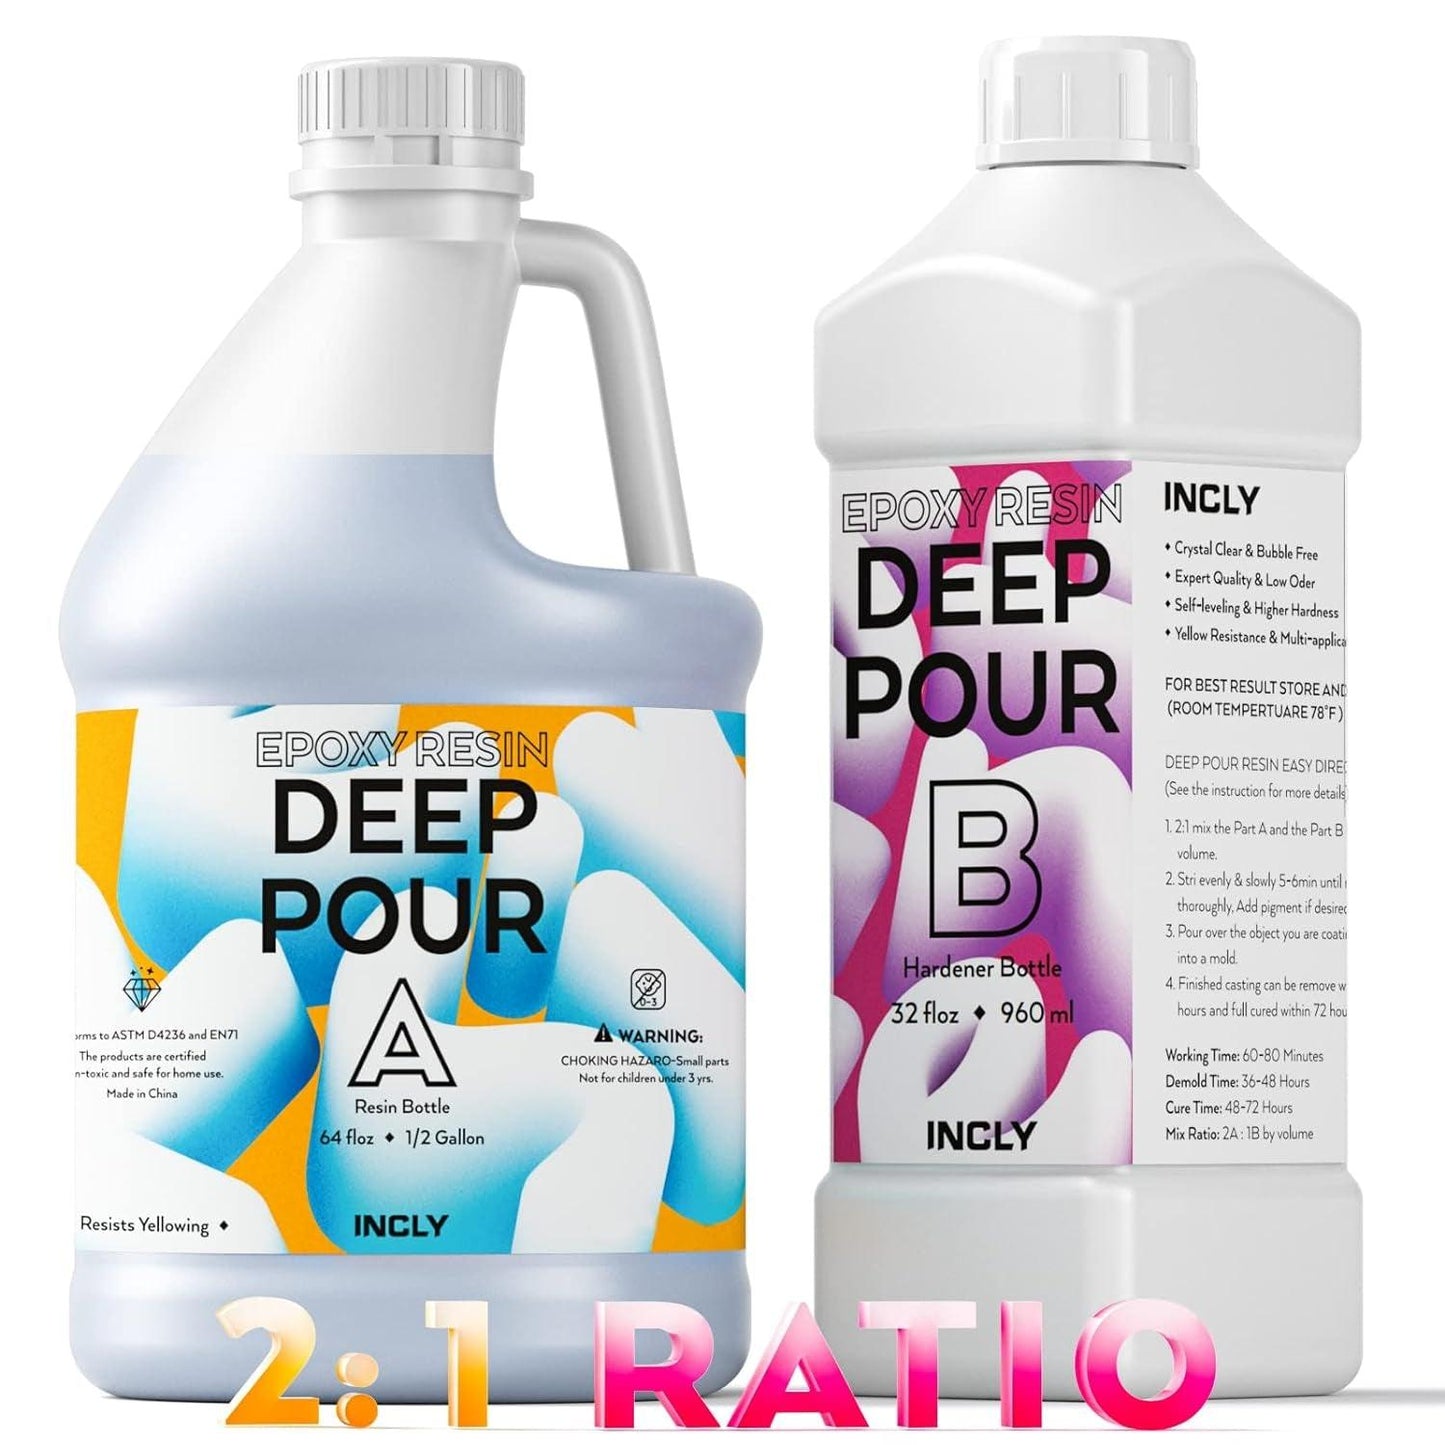 INCLY 1.5 Gallon Deep Pour Epoxy Resin Kit, High Gloss & Bubbles Free 2 to  4 for